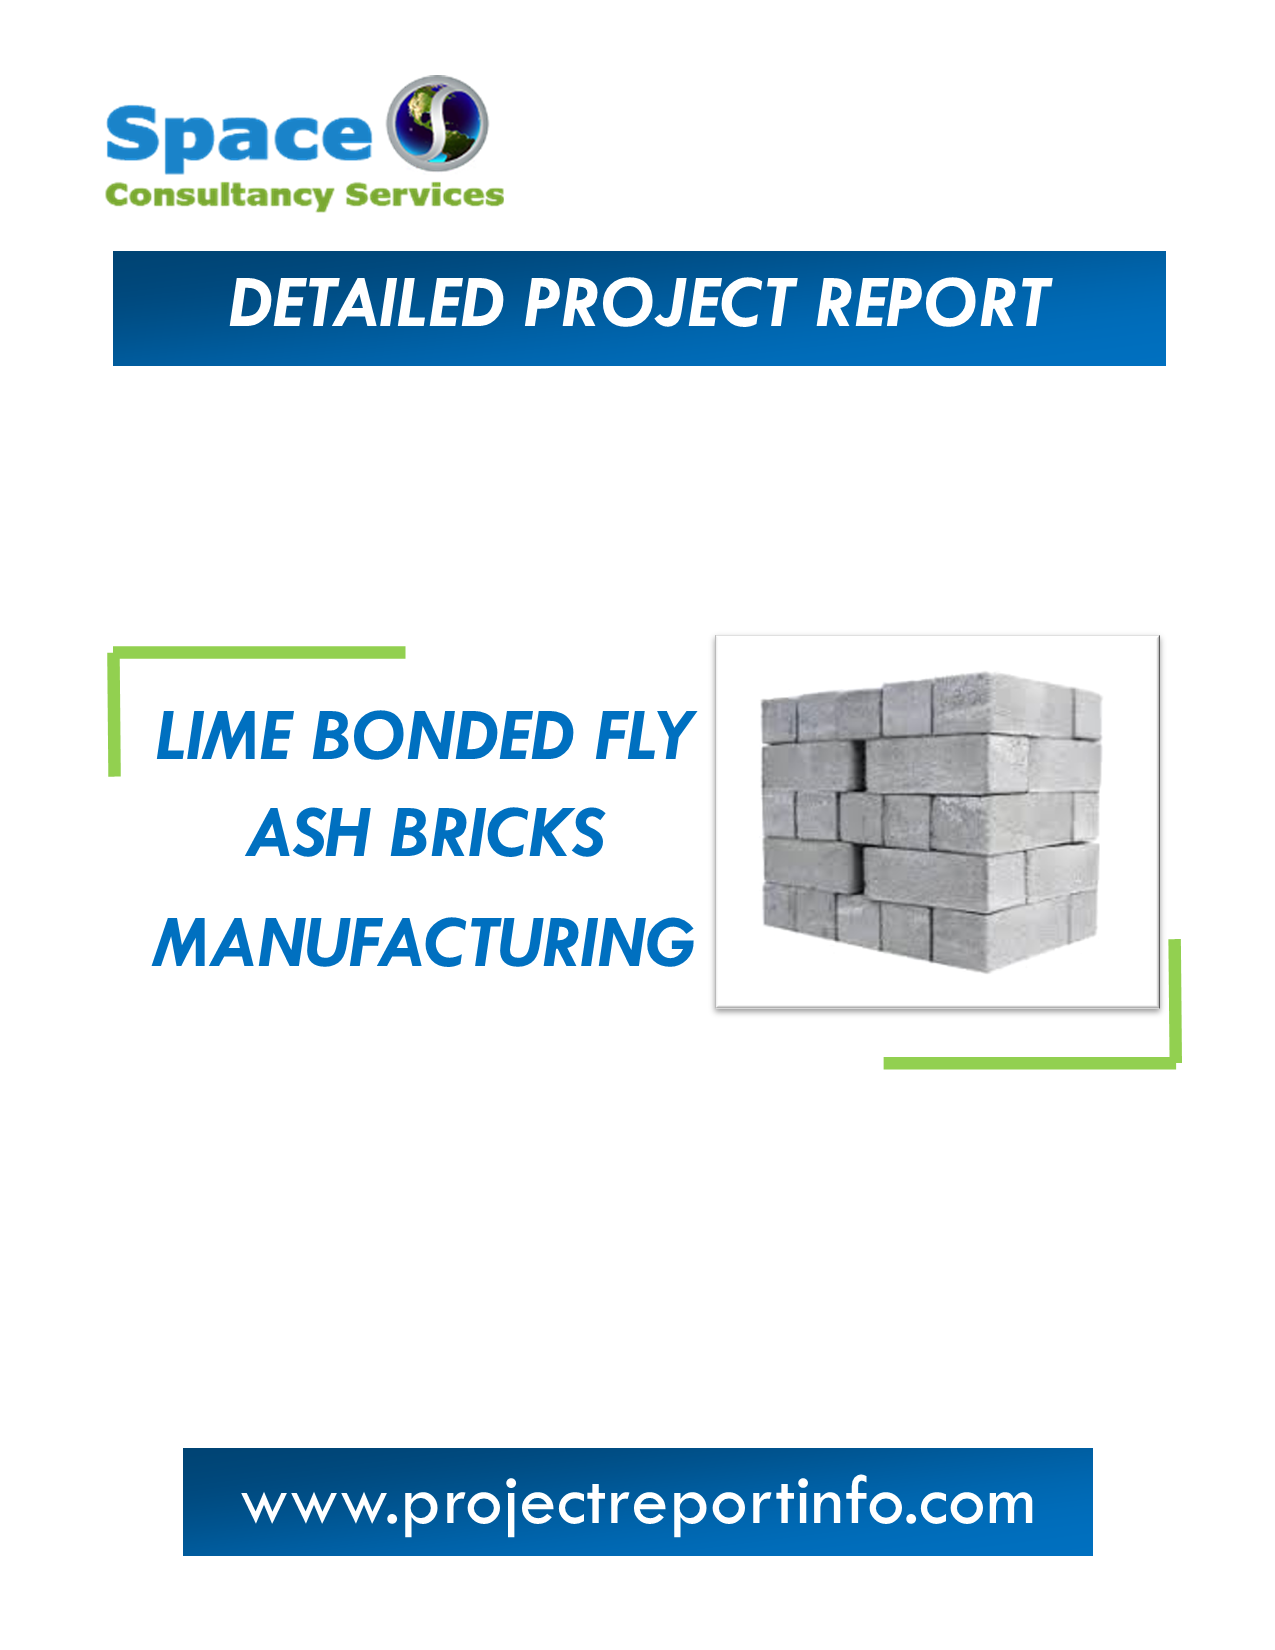 Project Report on Lime Bonded Fly Ash Bricks Manufacturing